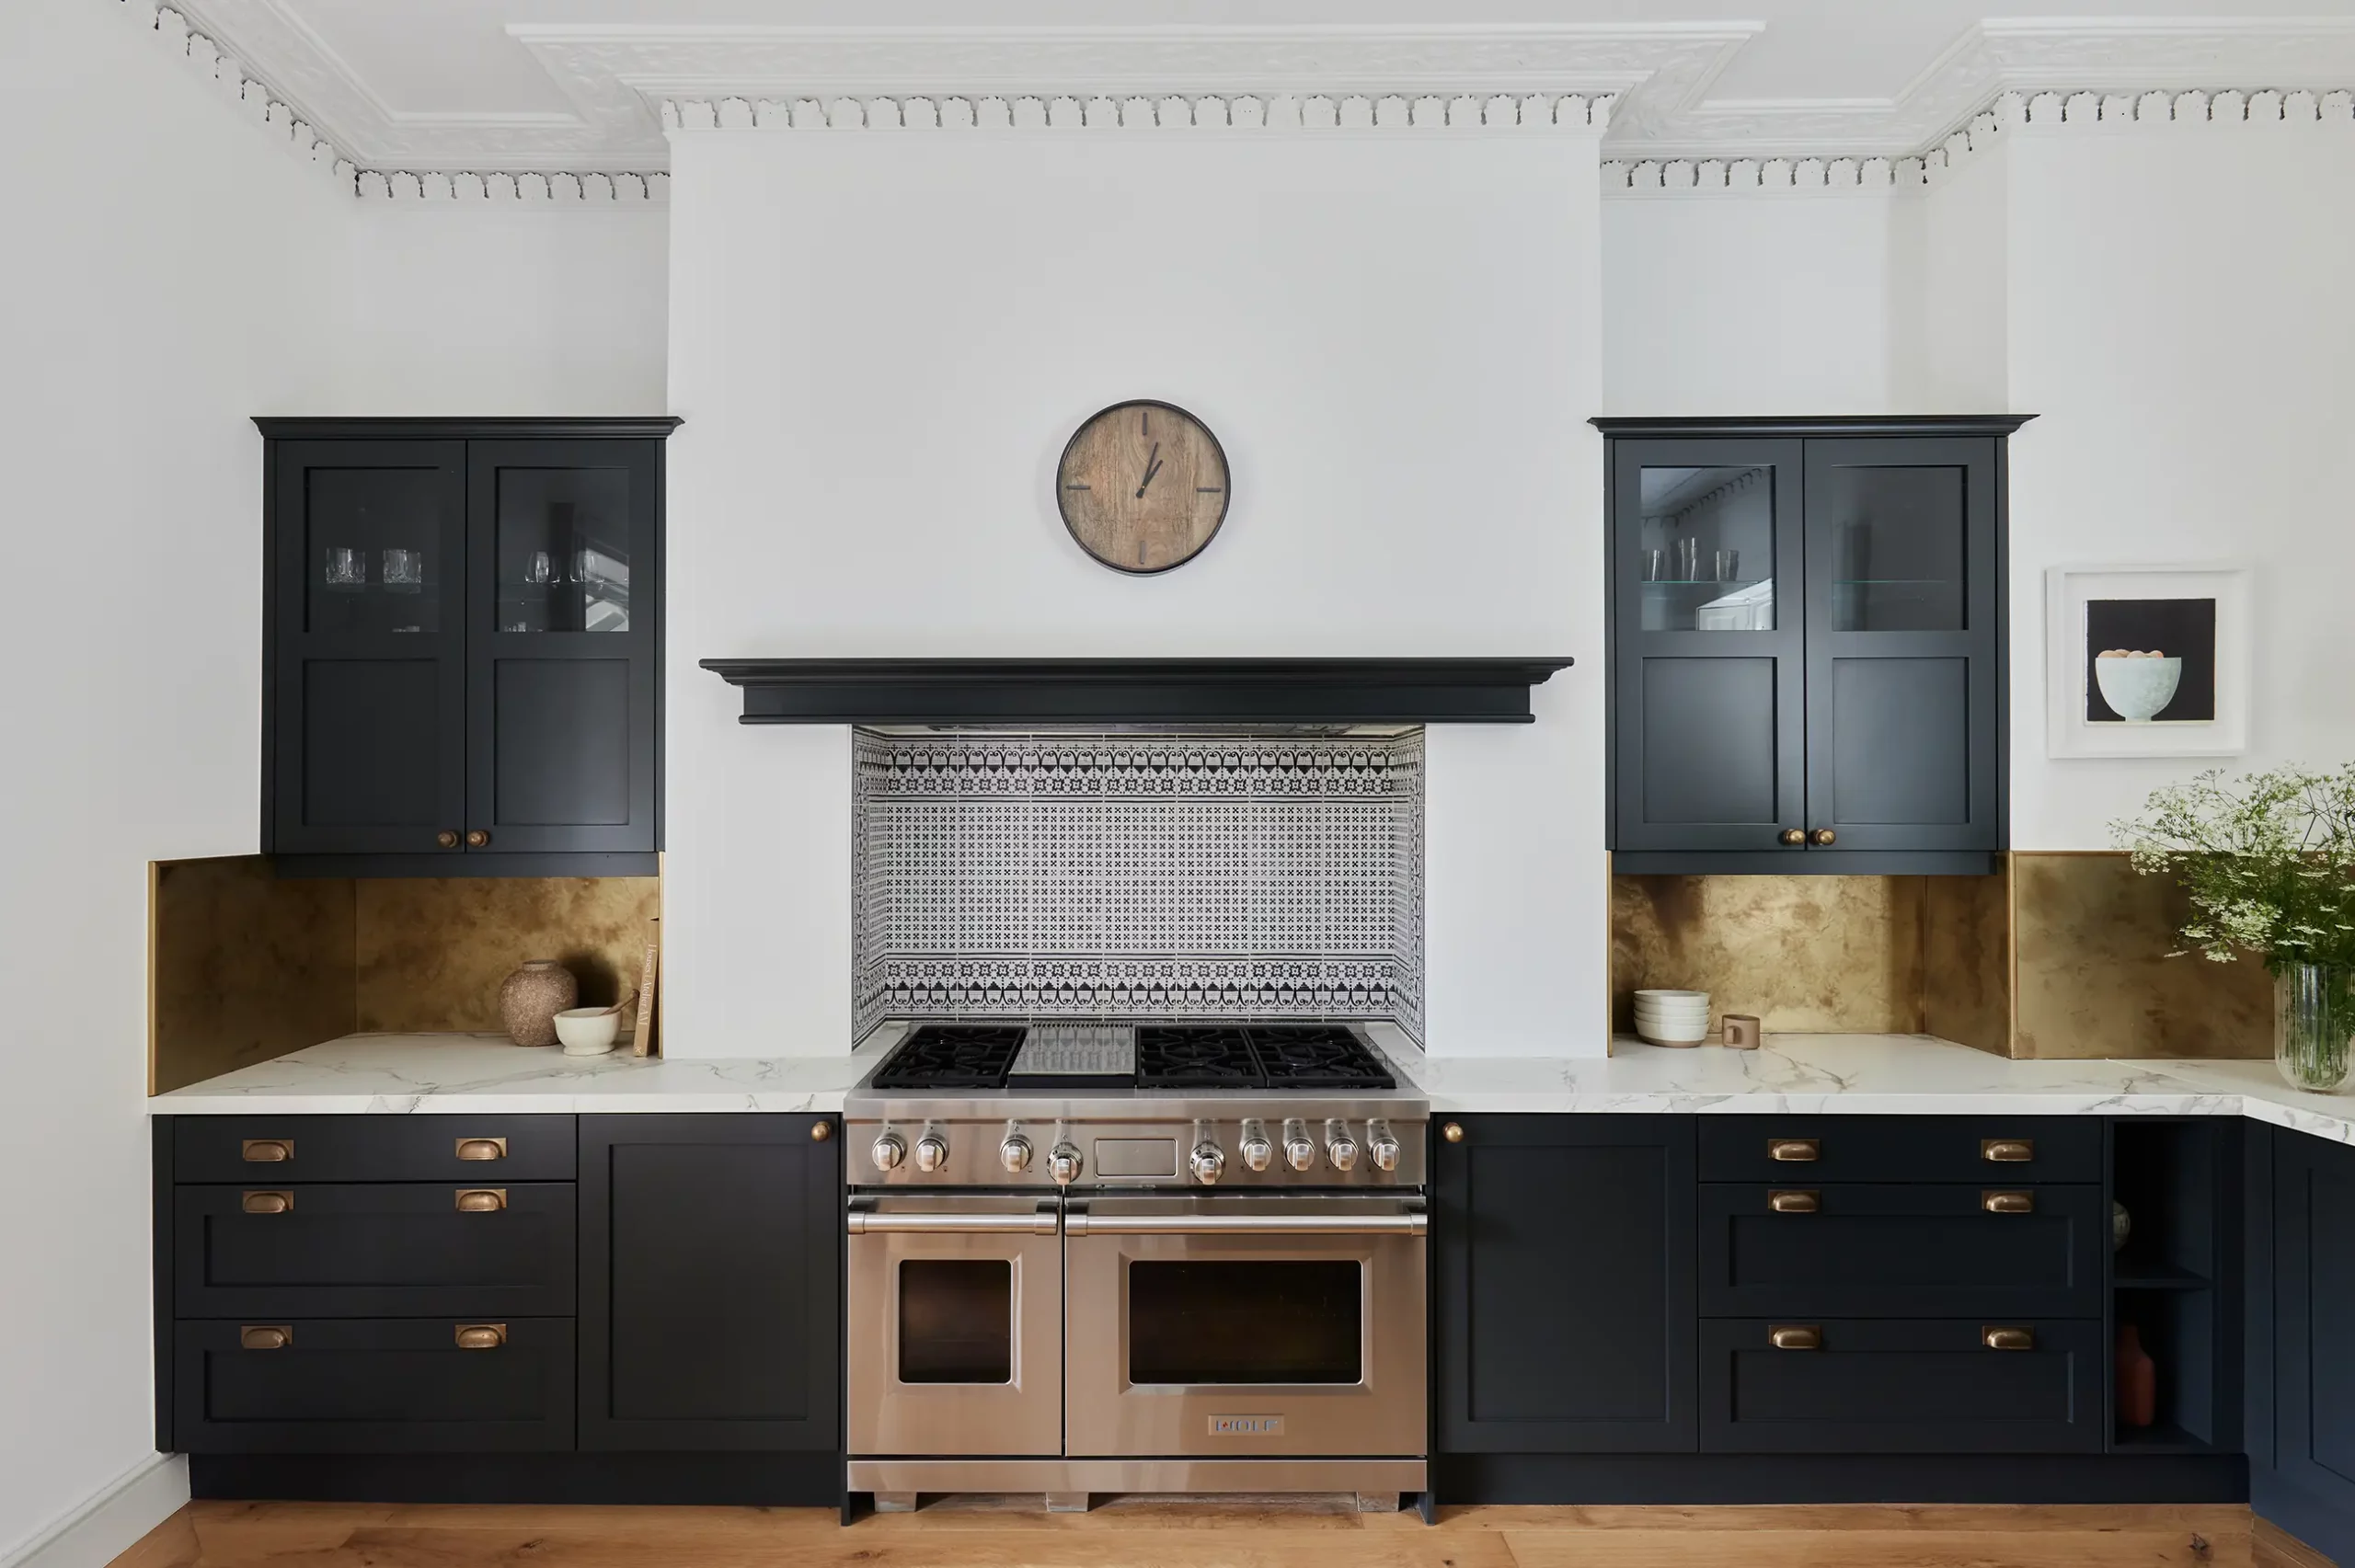 Blending Classic and Contemporary Styles in the Kitchen